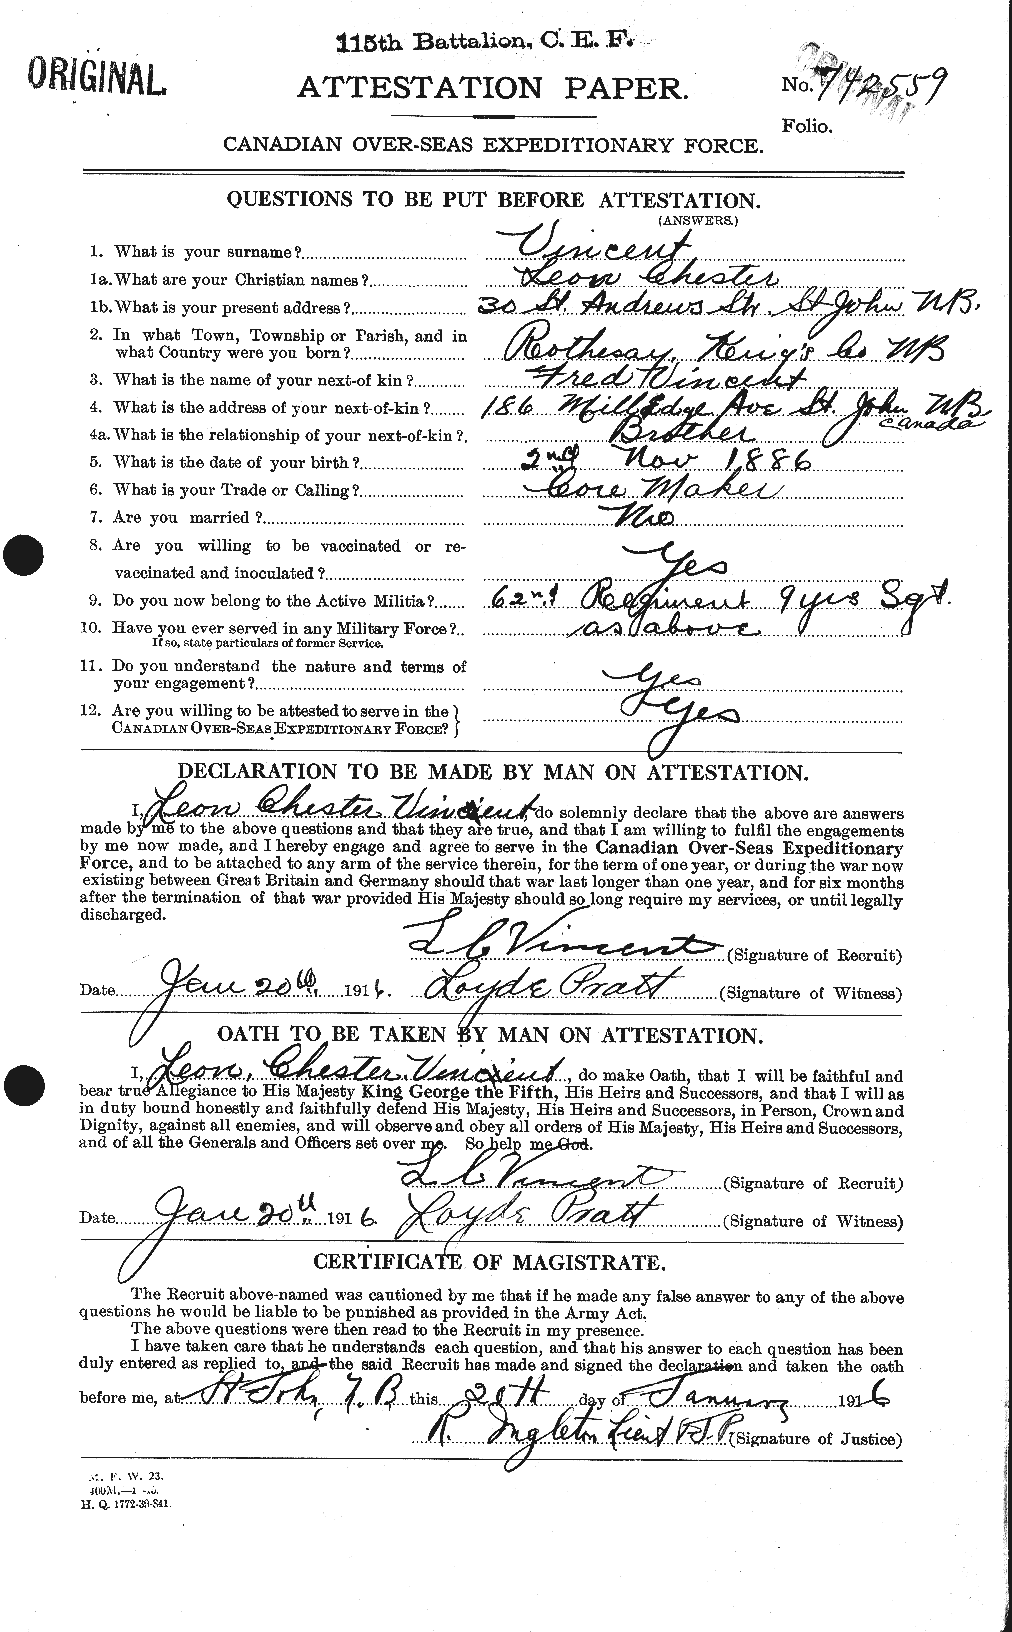 Personnel Records of the First World War - CEF 656481a